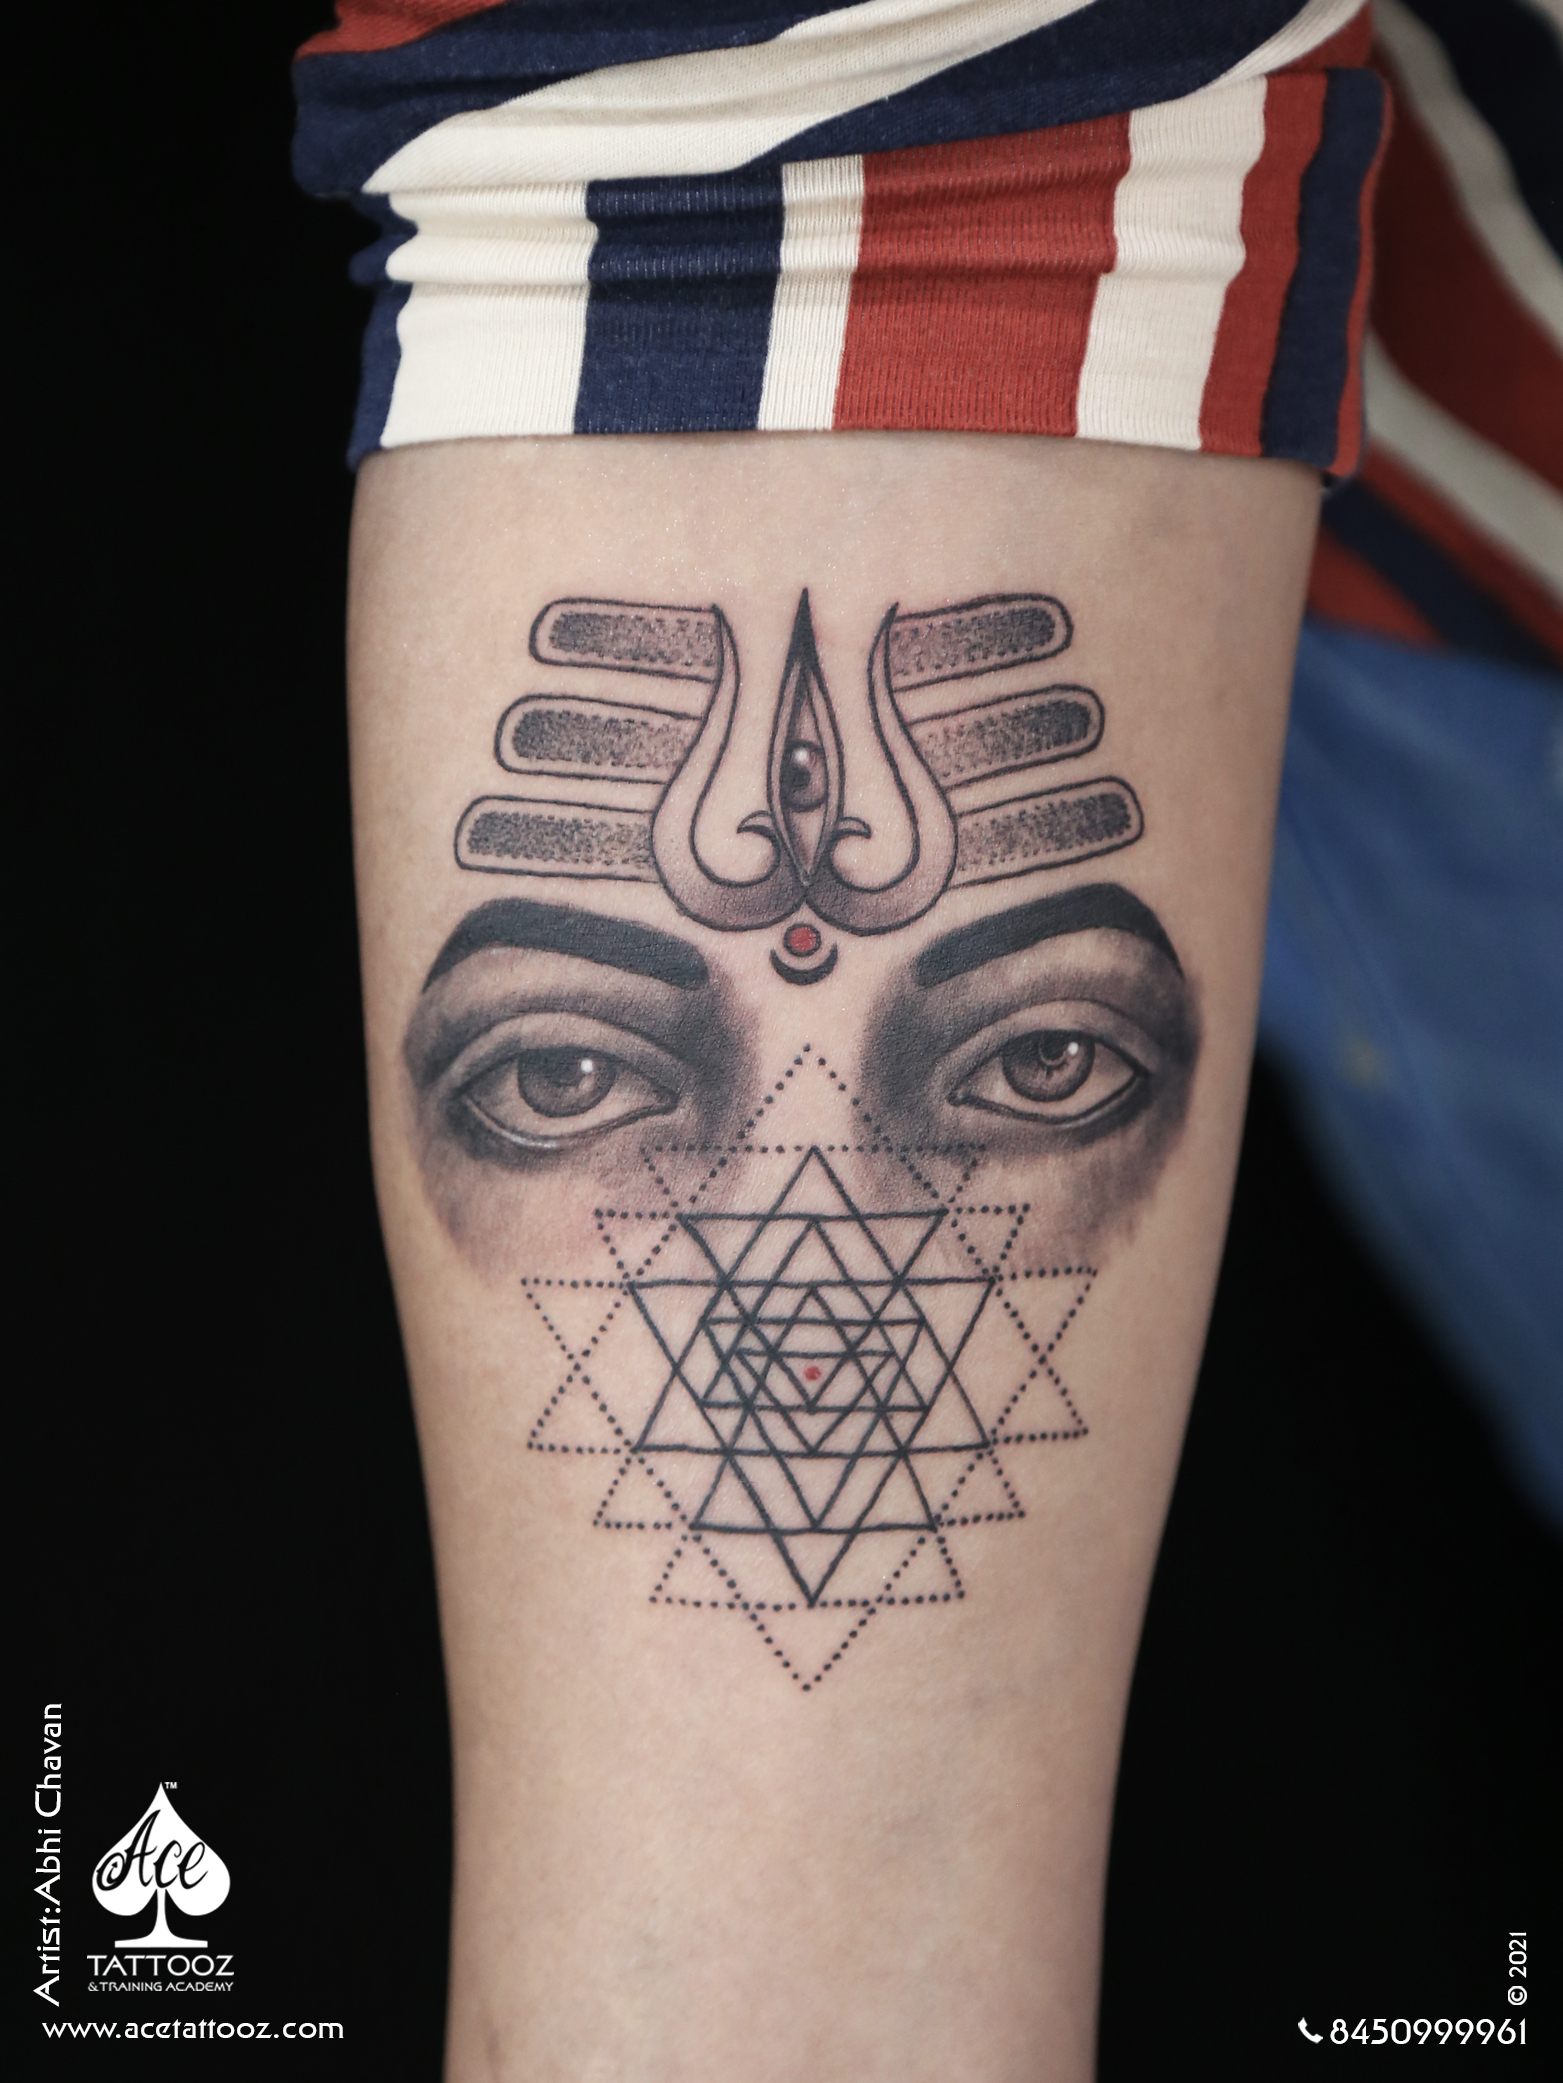 Shiv Shakti tattoo. Tattooed one of my client which I customised this  design as free hand. | Instagram